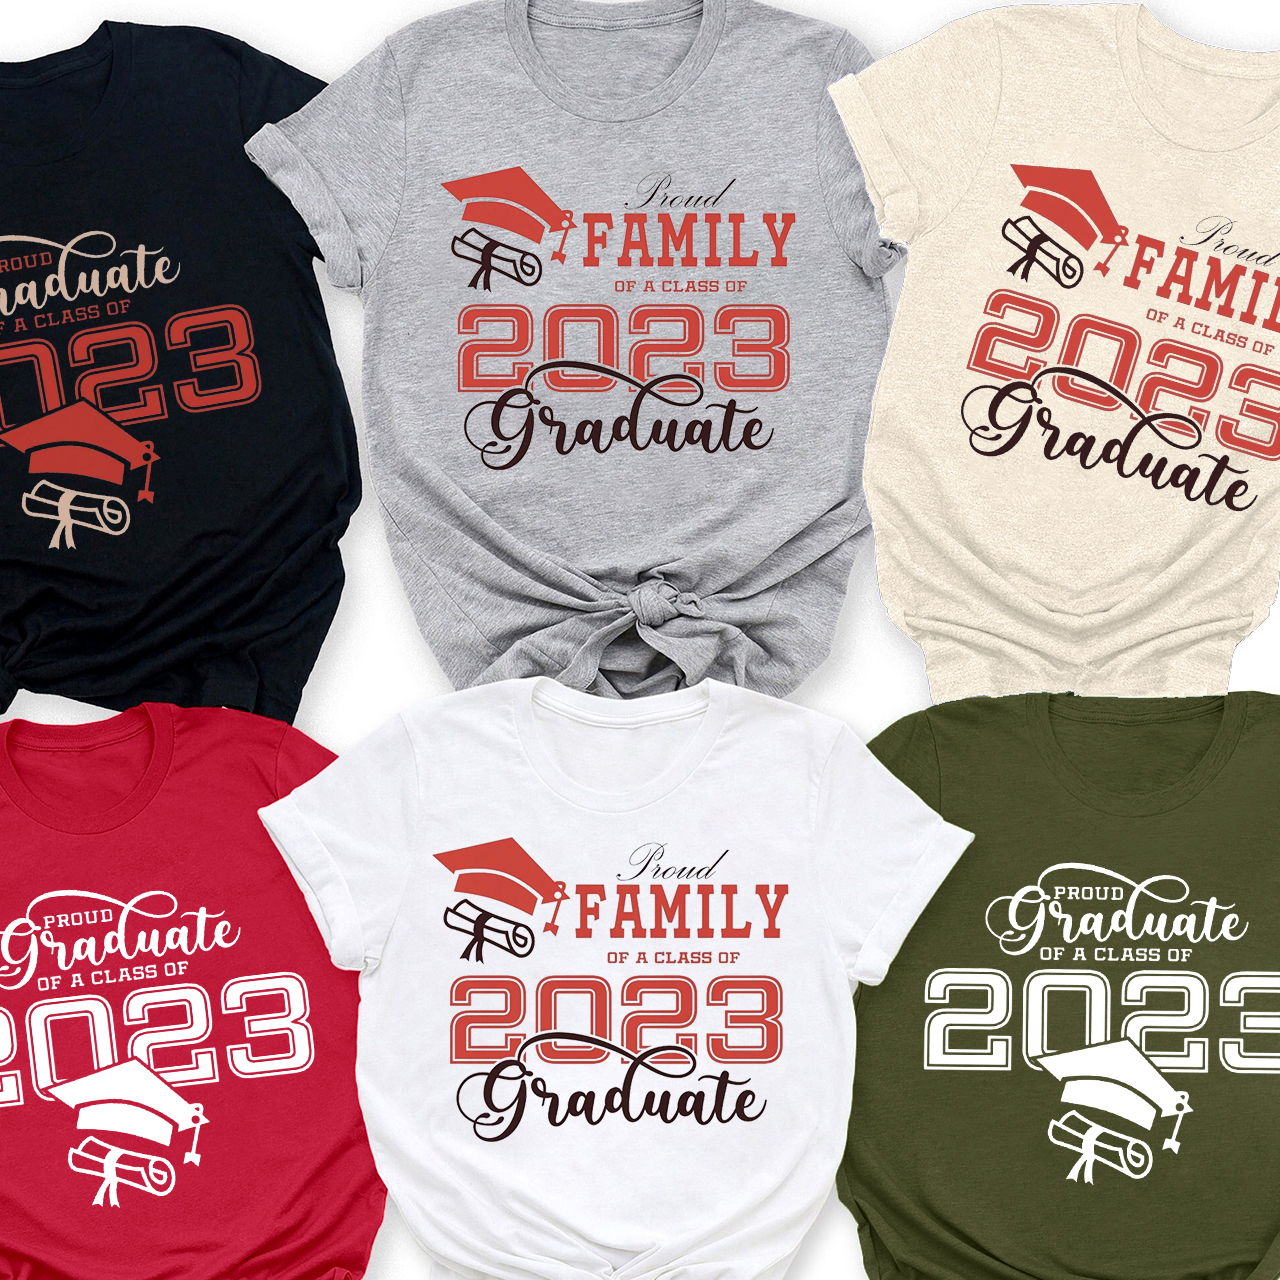 Personalized Proud Family Members of 2023 Graduation Shirts